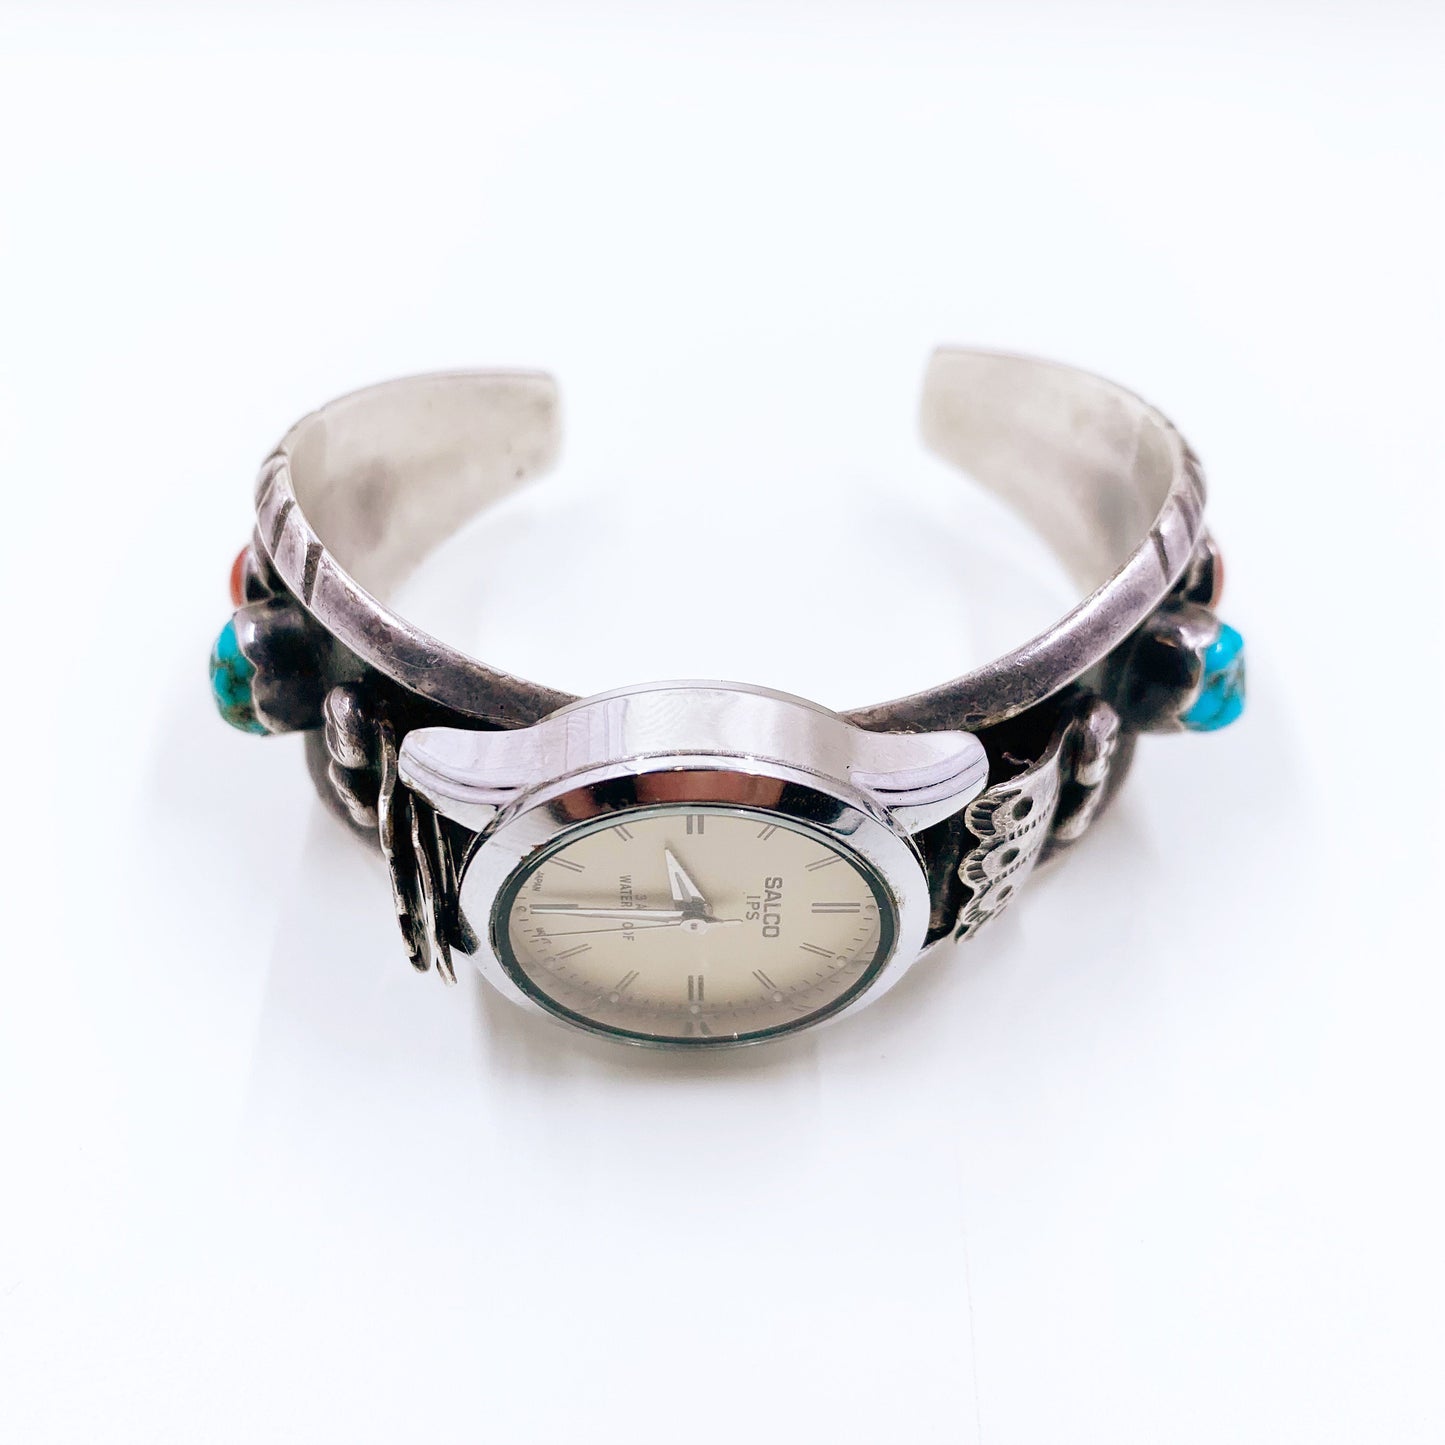 Vintage Silver Turquoise and Coral Watch Cuff | Southwest Silver Watch Cuff Bracelet